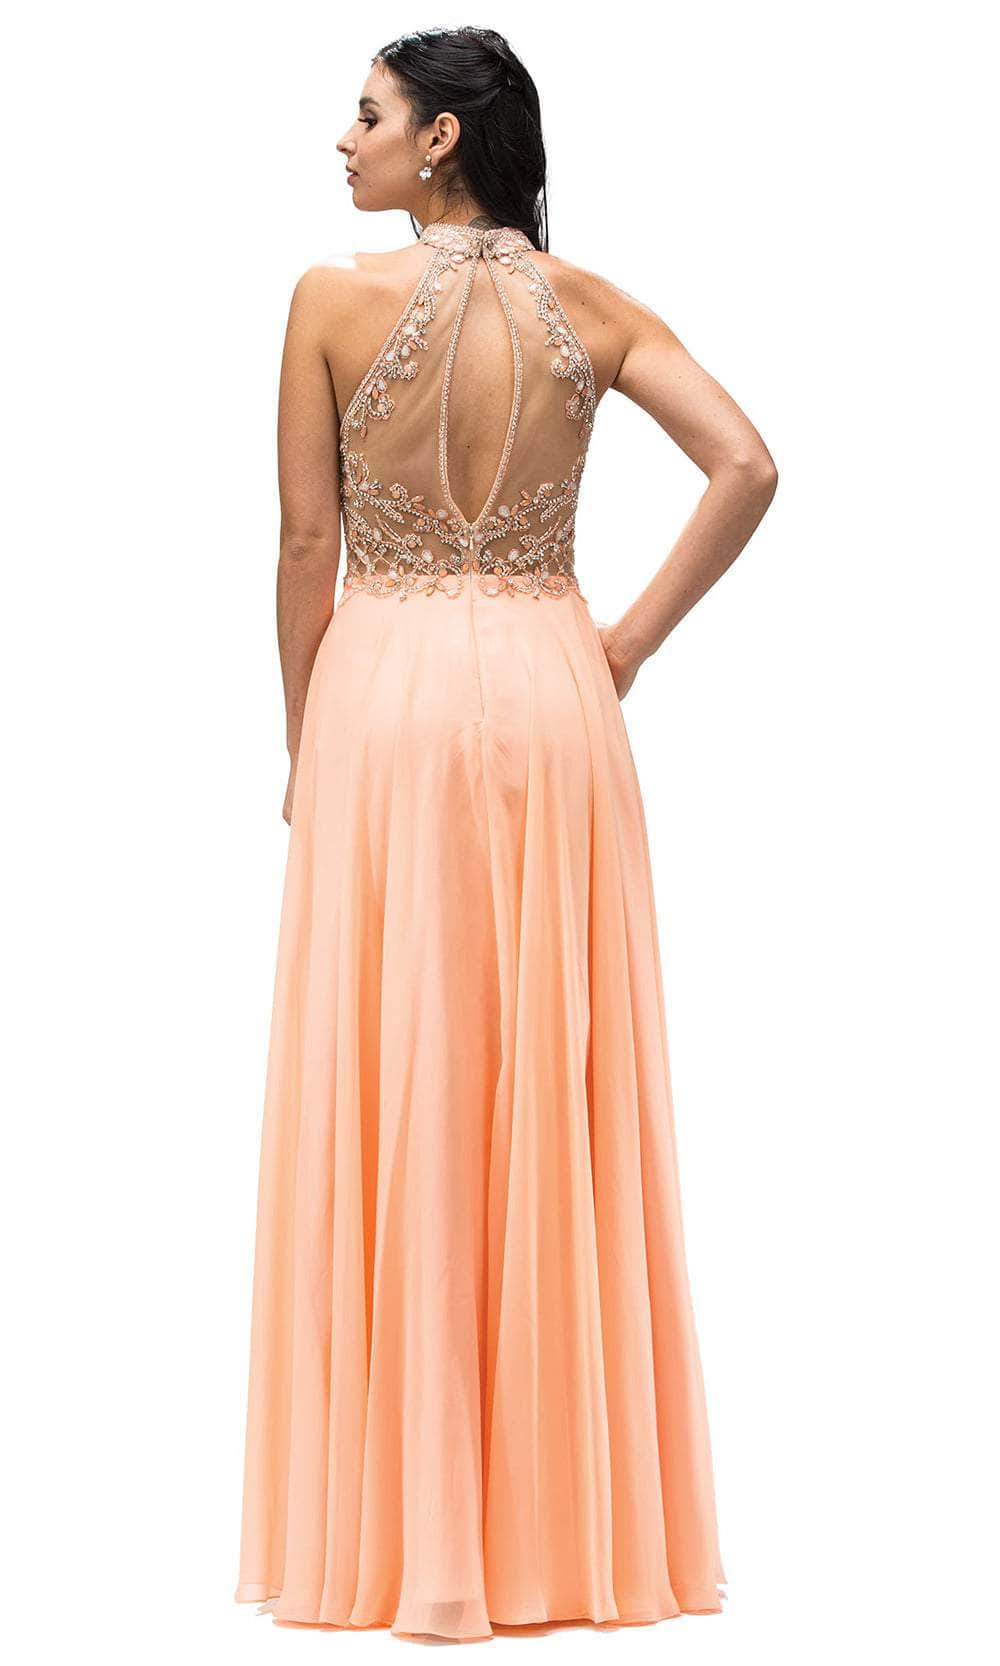 Dancing Queen 9293 - Keyhole Back A-Line Prom Gown Prom Dresses 